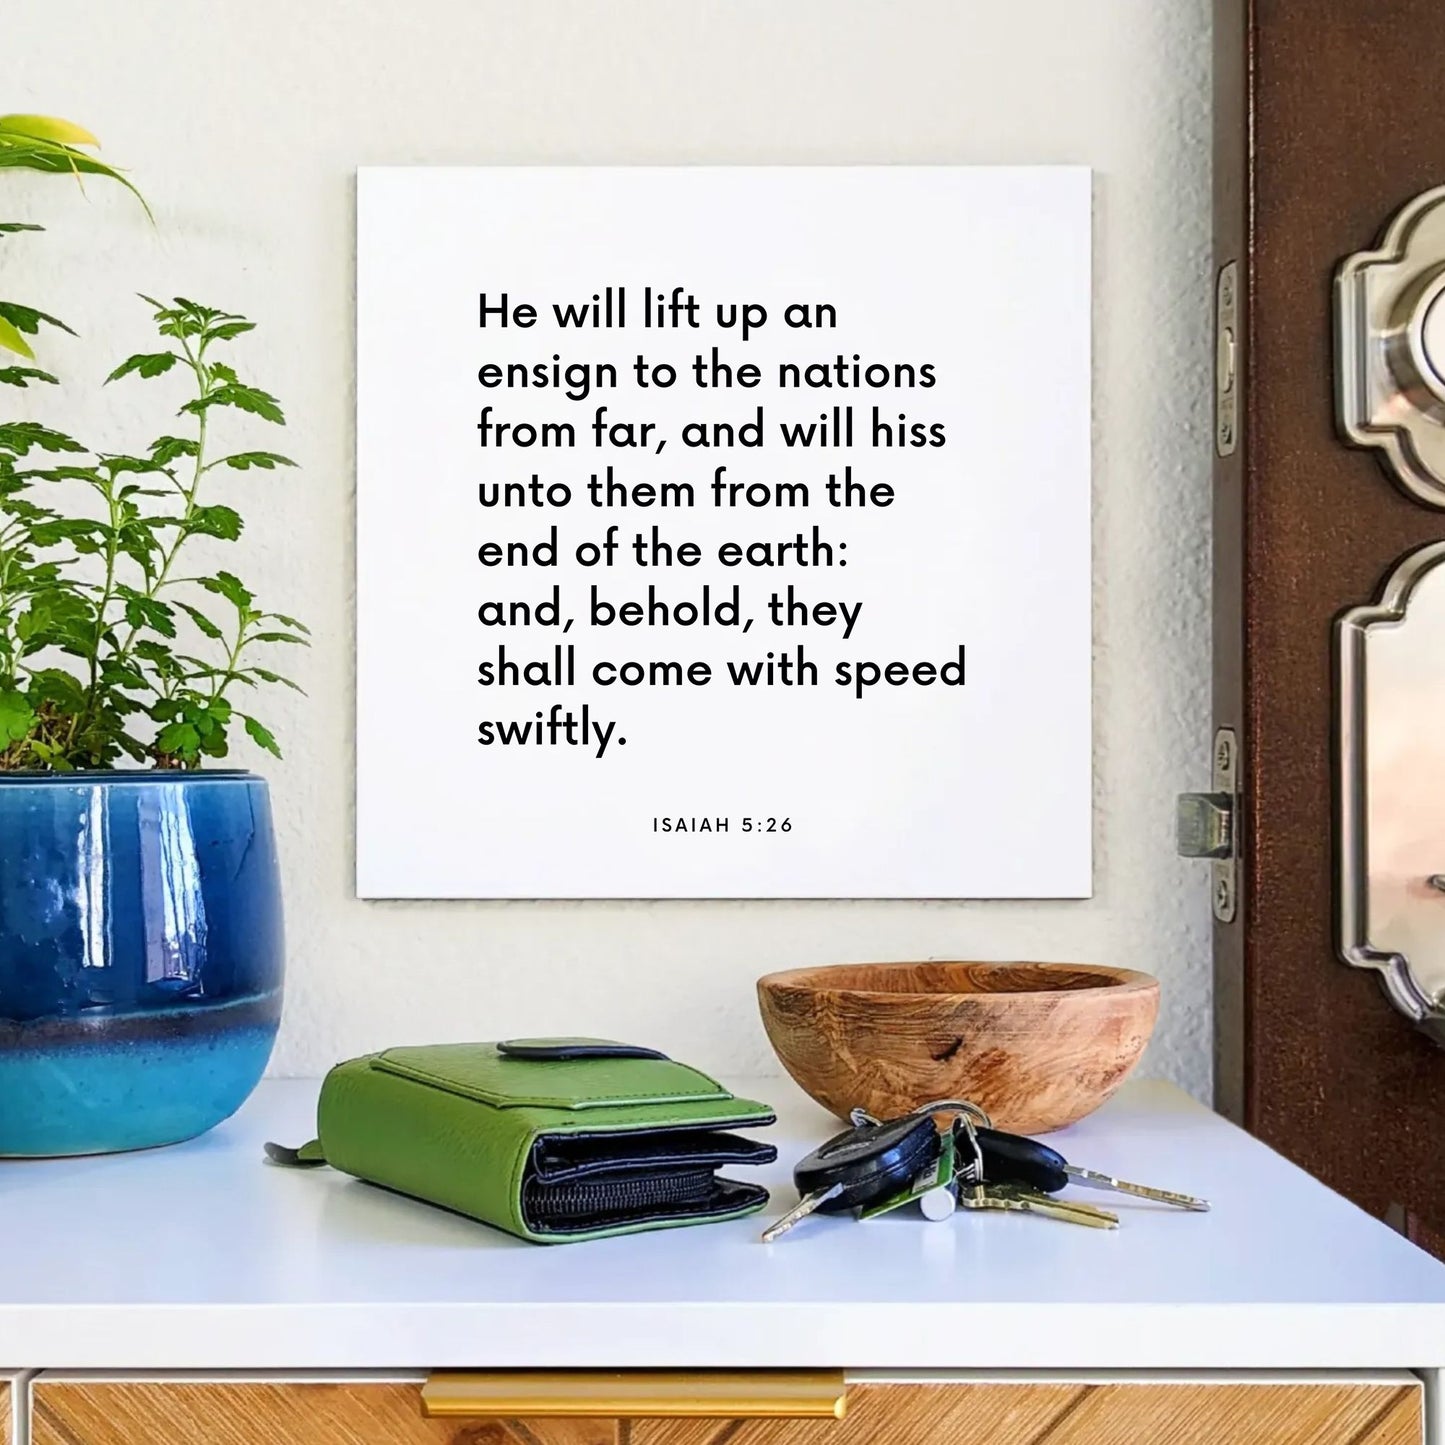 Entryway mouting of the scripture tile for Isaiah 5:26 - "He will lift up an ensign to the nations from far"